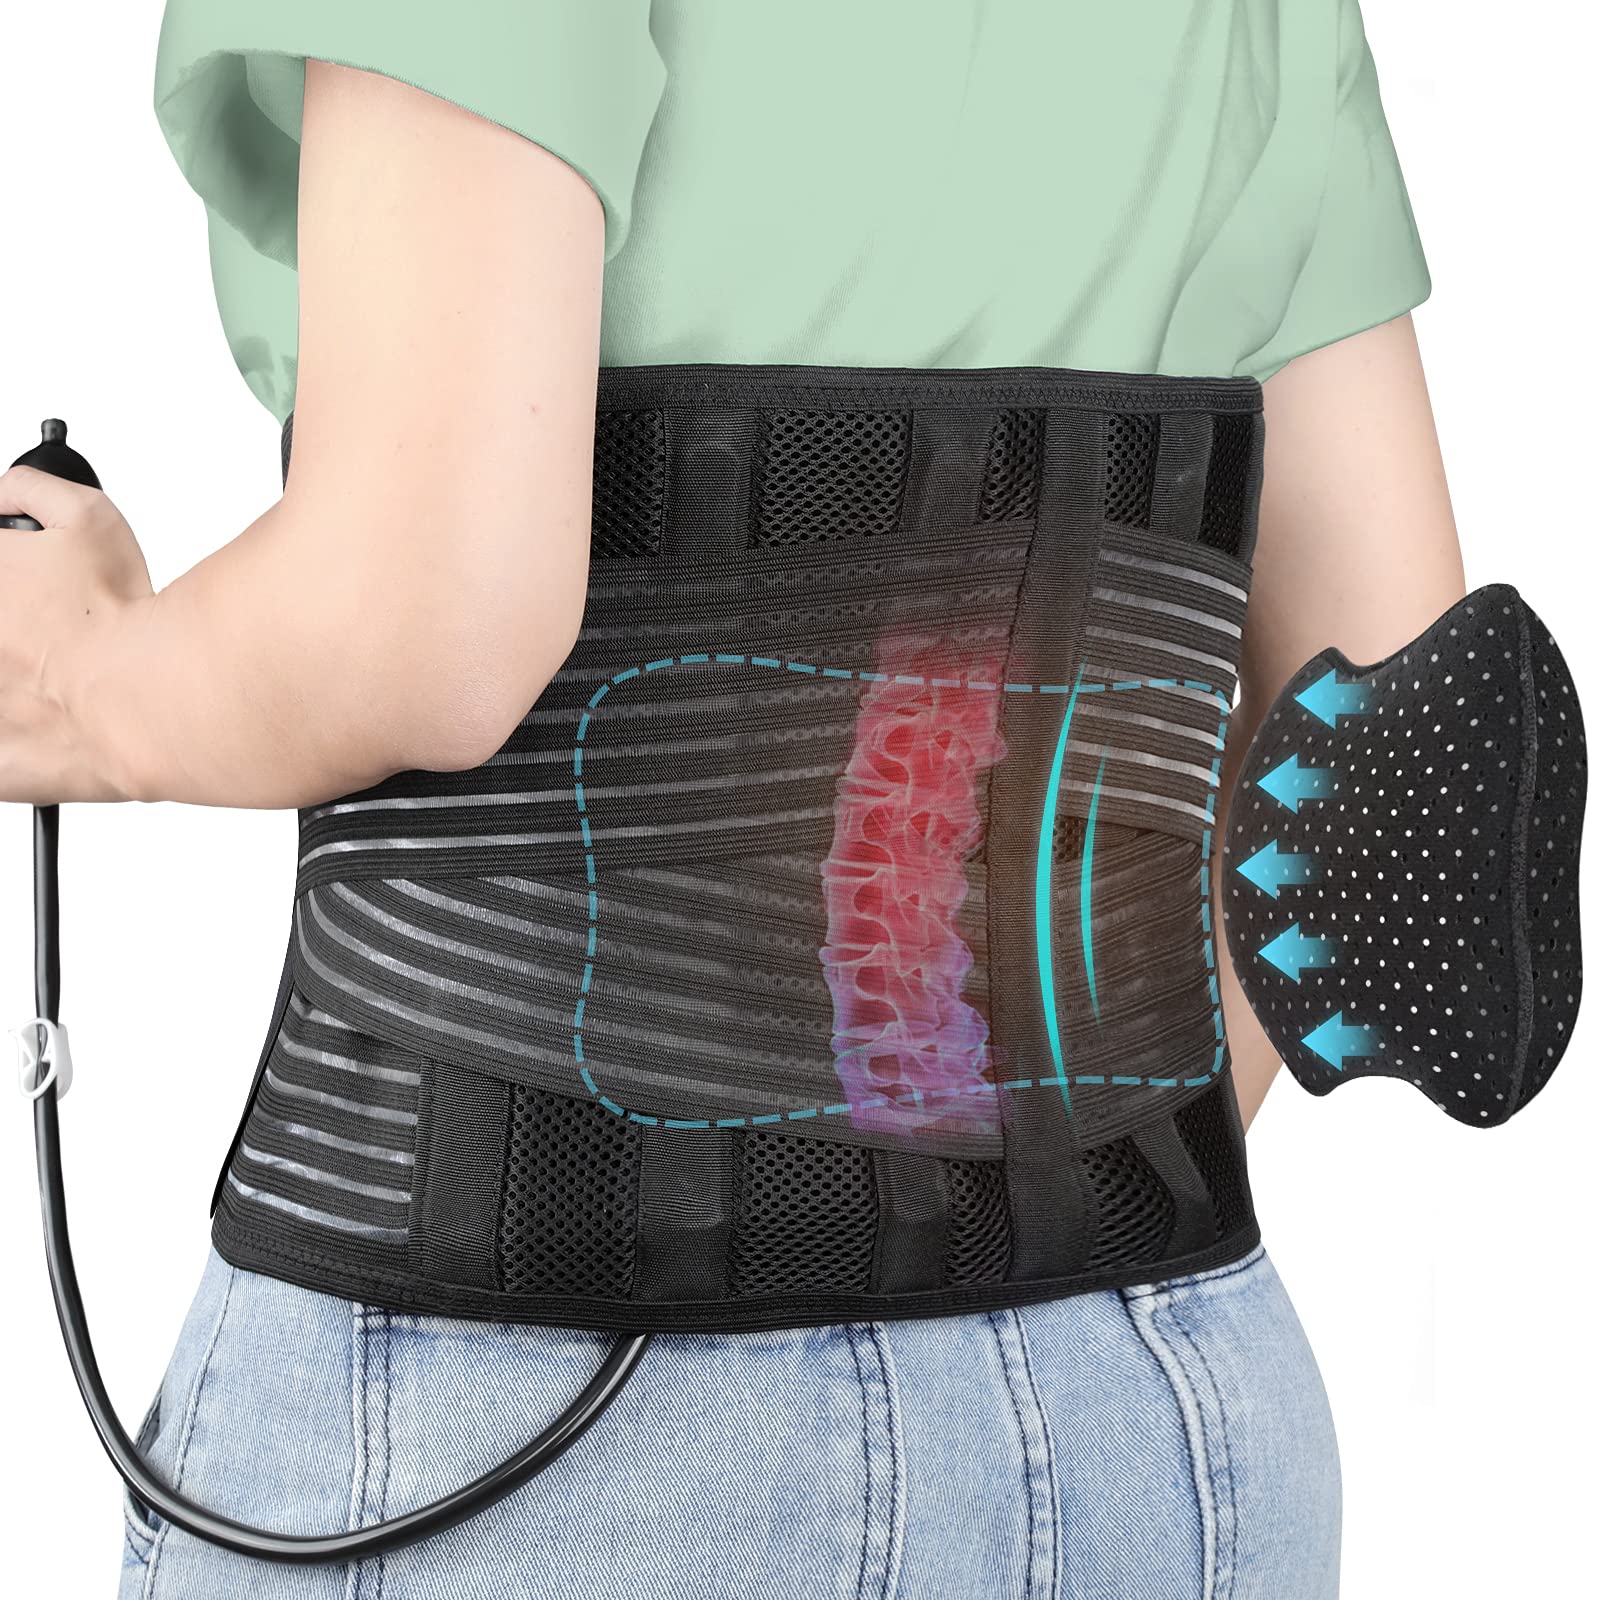 DARLIS Back Brace with Inflatable Pad - Immediately Relieve Lower Back Pain,  Herniated Disc, Sciatica, Scoliosis and more, Dual Adjustable Support  Straps - Lower Back Brace for Men Women S/M 28- 38